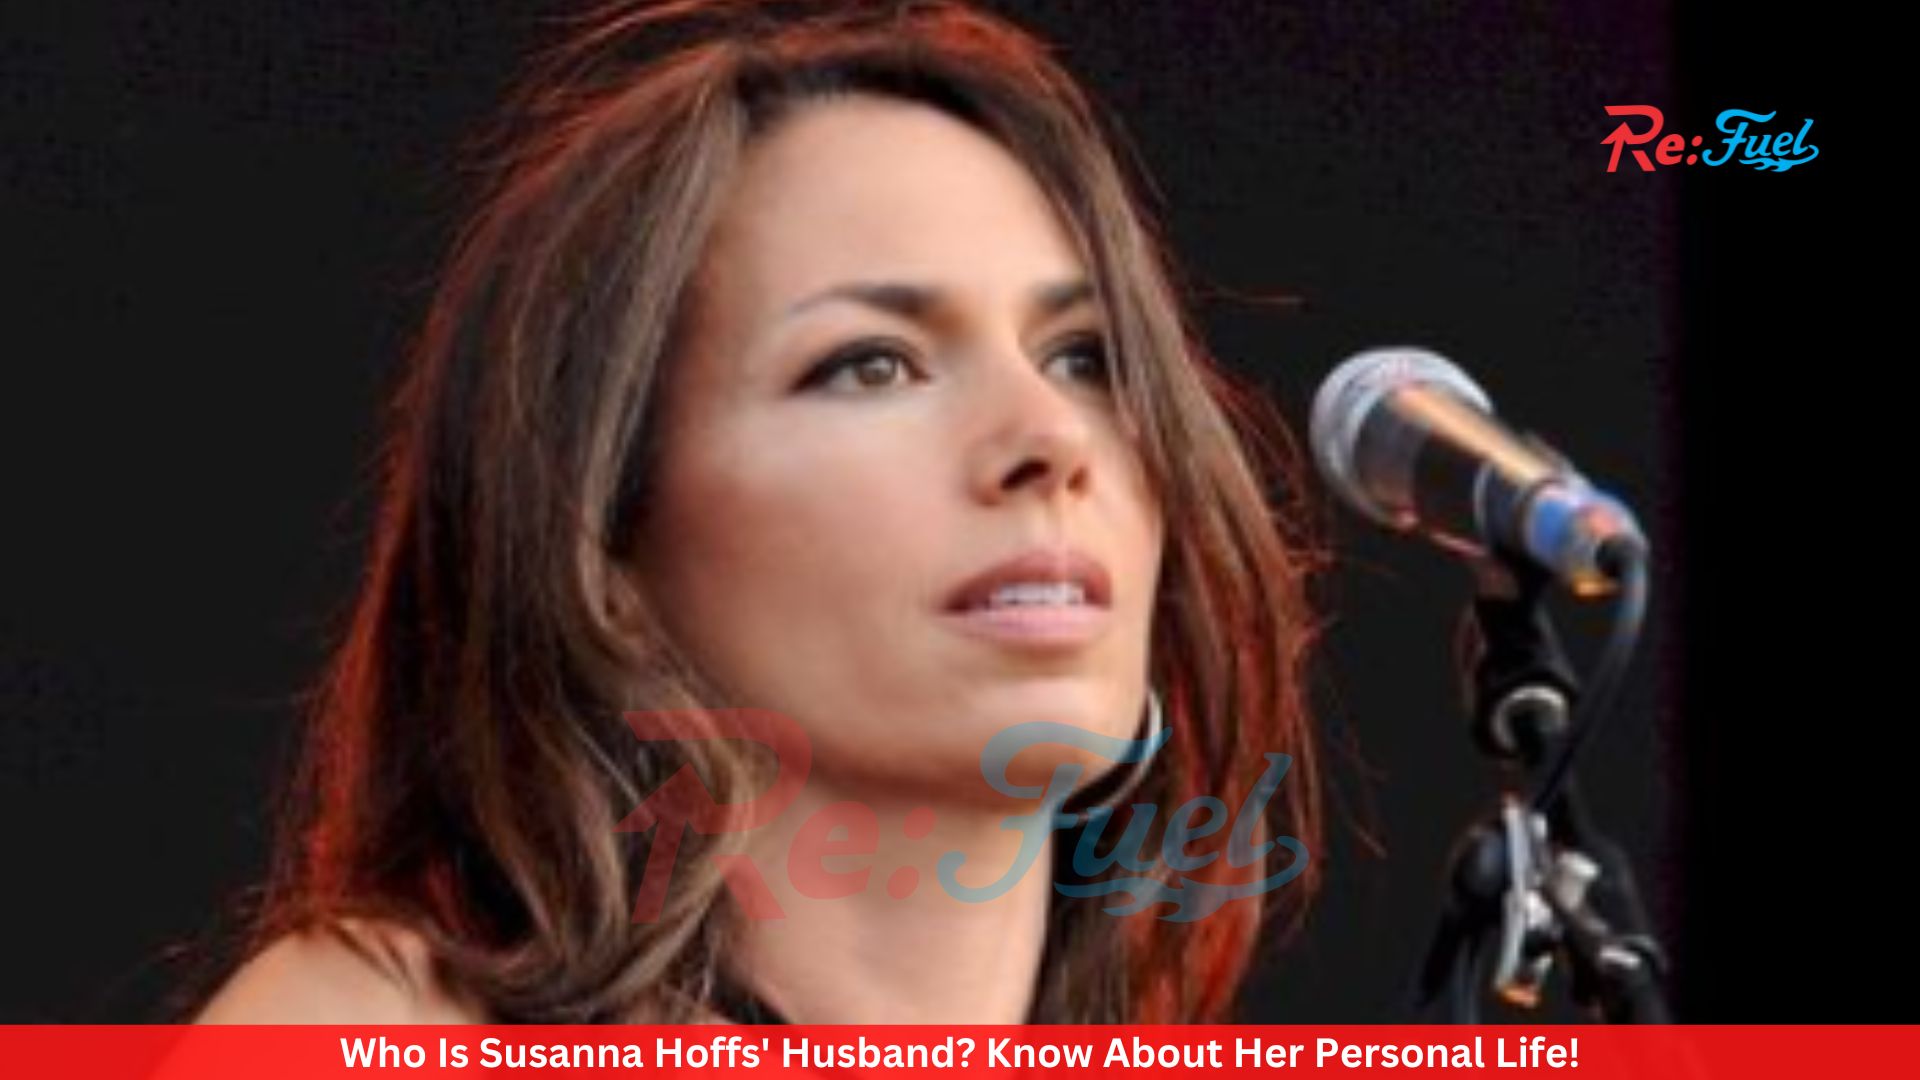 Who Is Susanna Hoffs' Husband? Know About Her Personal Life!